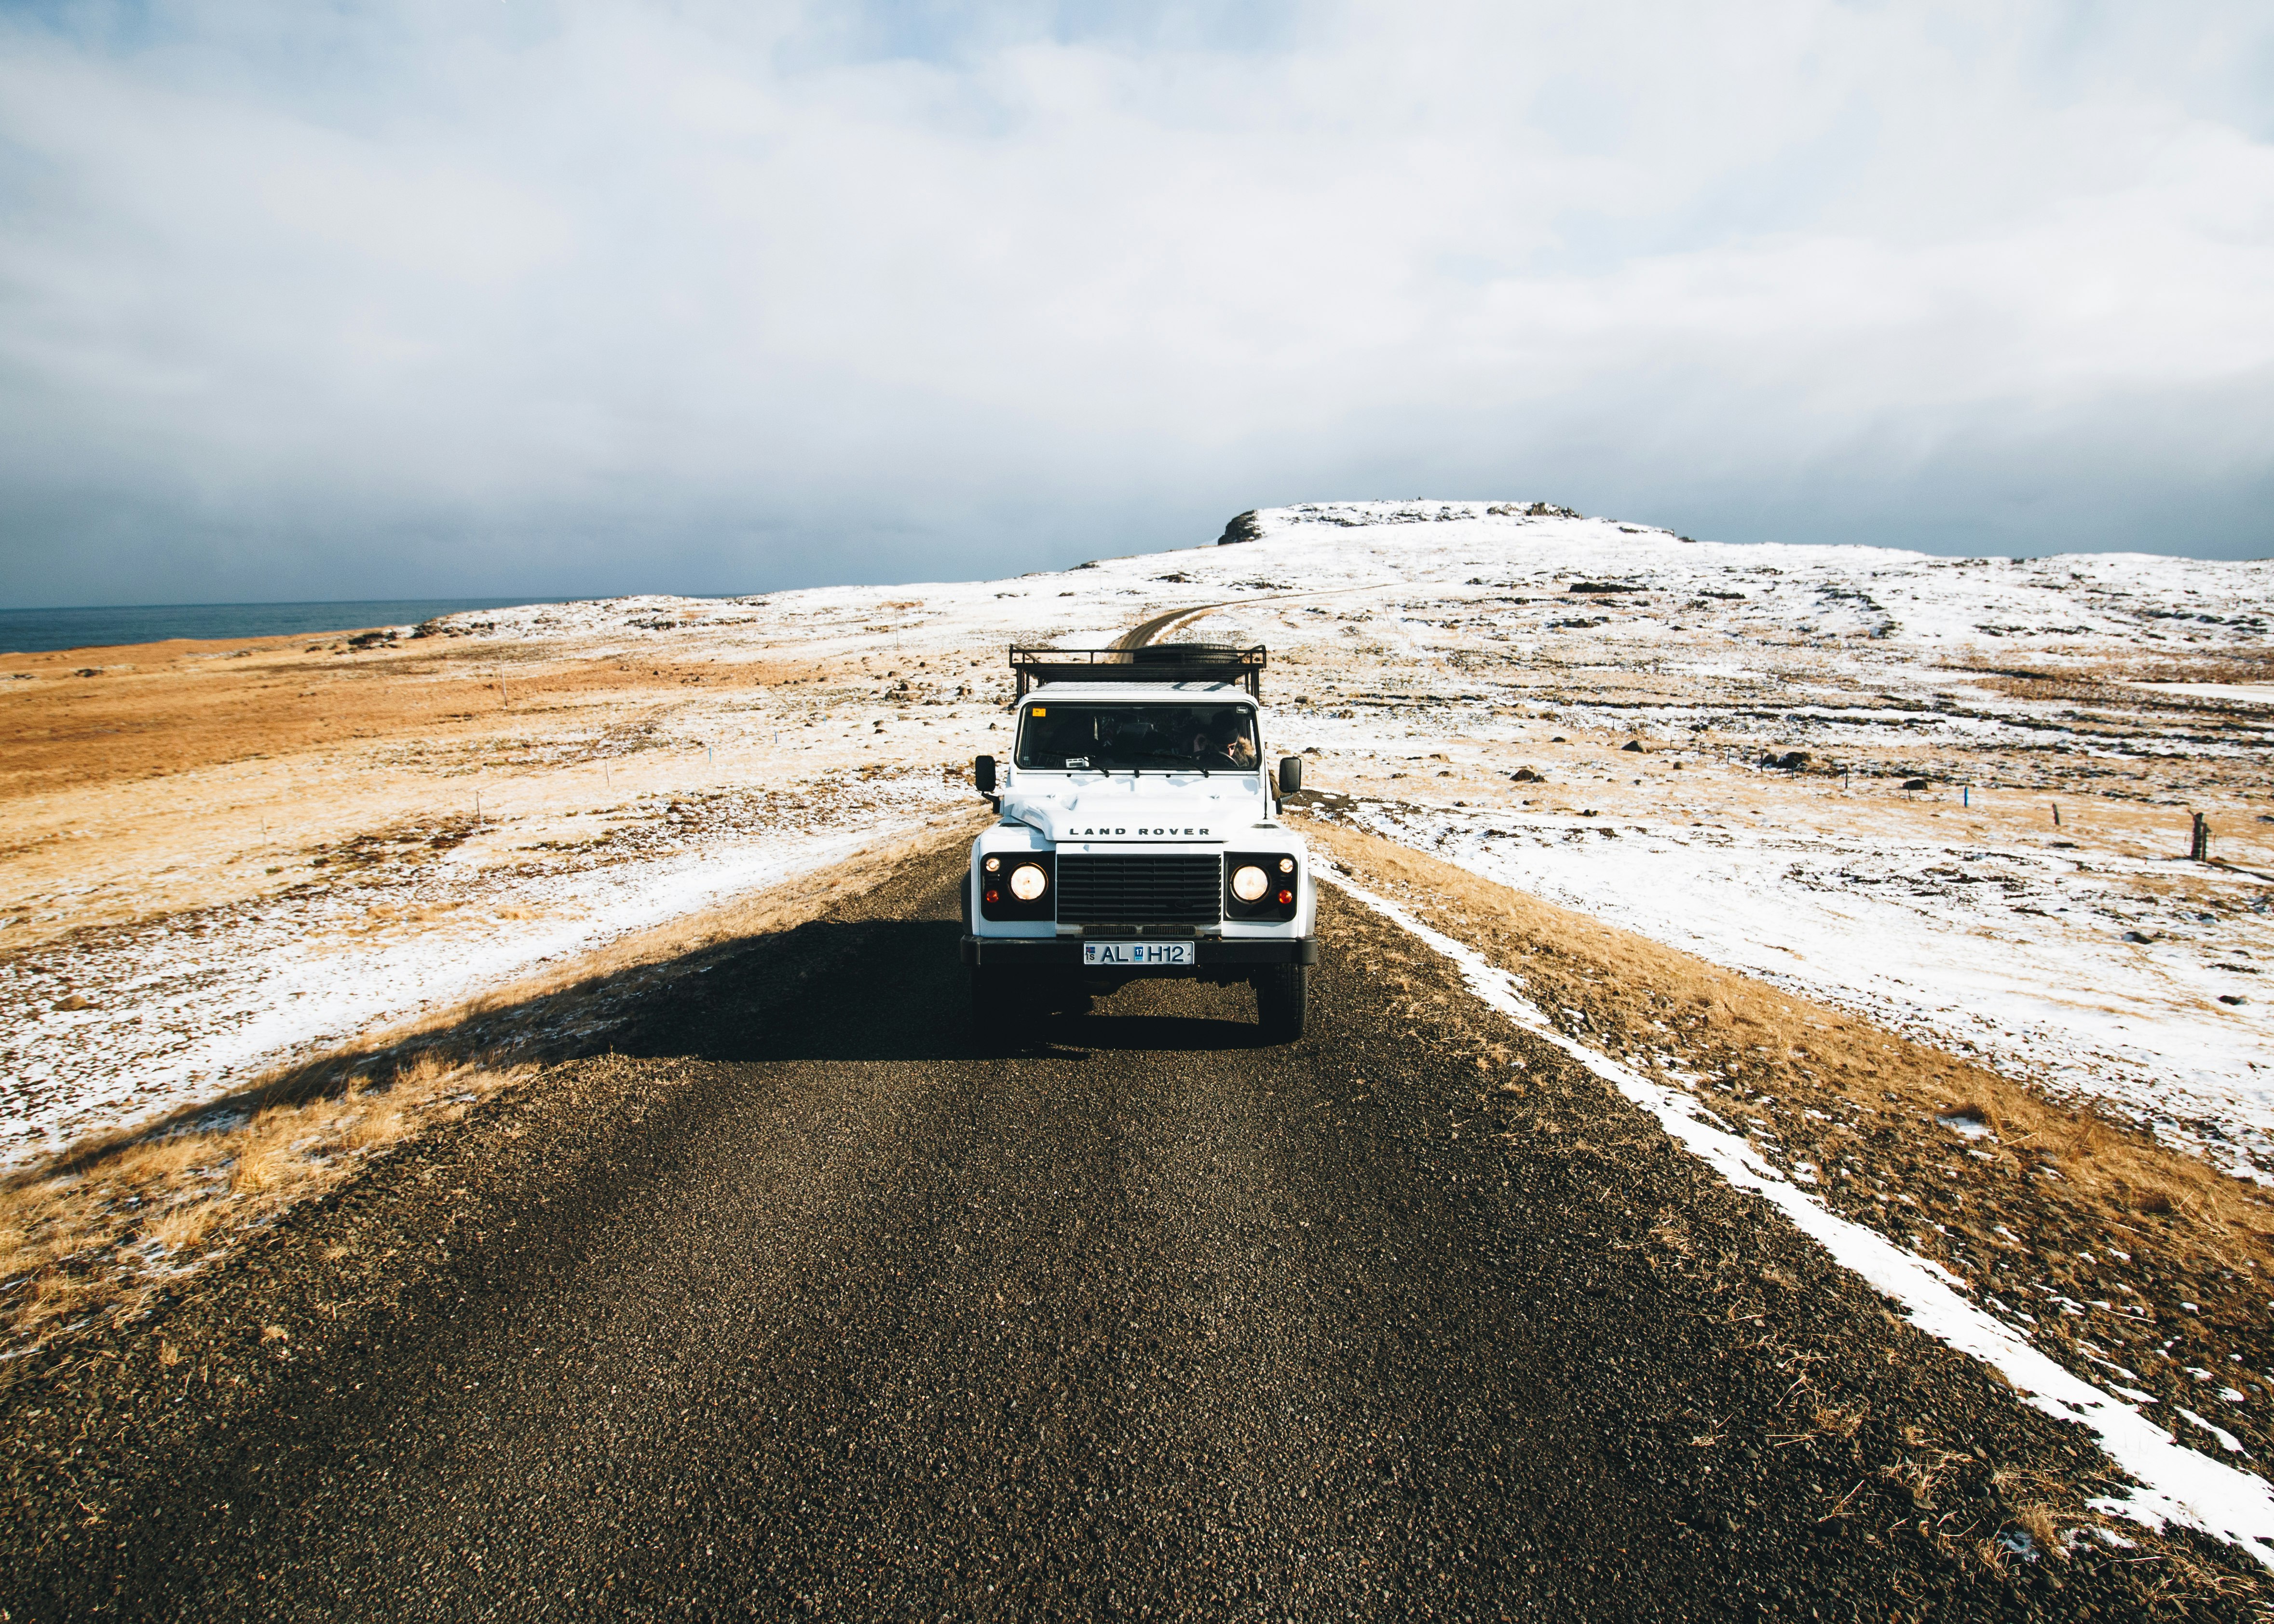 When travelling around the circumference of Iceland we made this converted Land Rover home for the week. Everything we did from eating, charging drones and cameras, sleeping, editing images and relaxing all happened in this car. 

You’ve not quite experienced living until you live out of a car in -20 deg temps.

Best week ever.